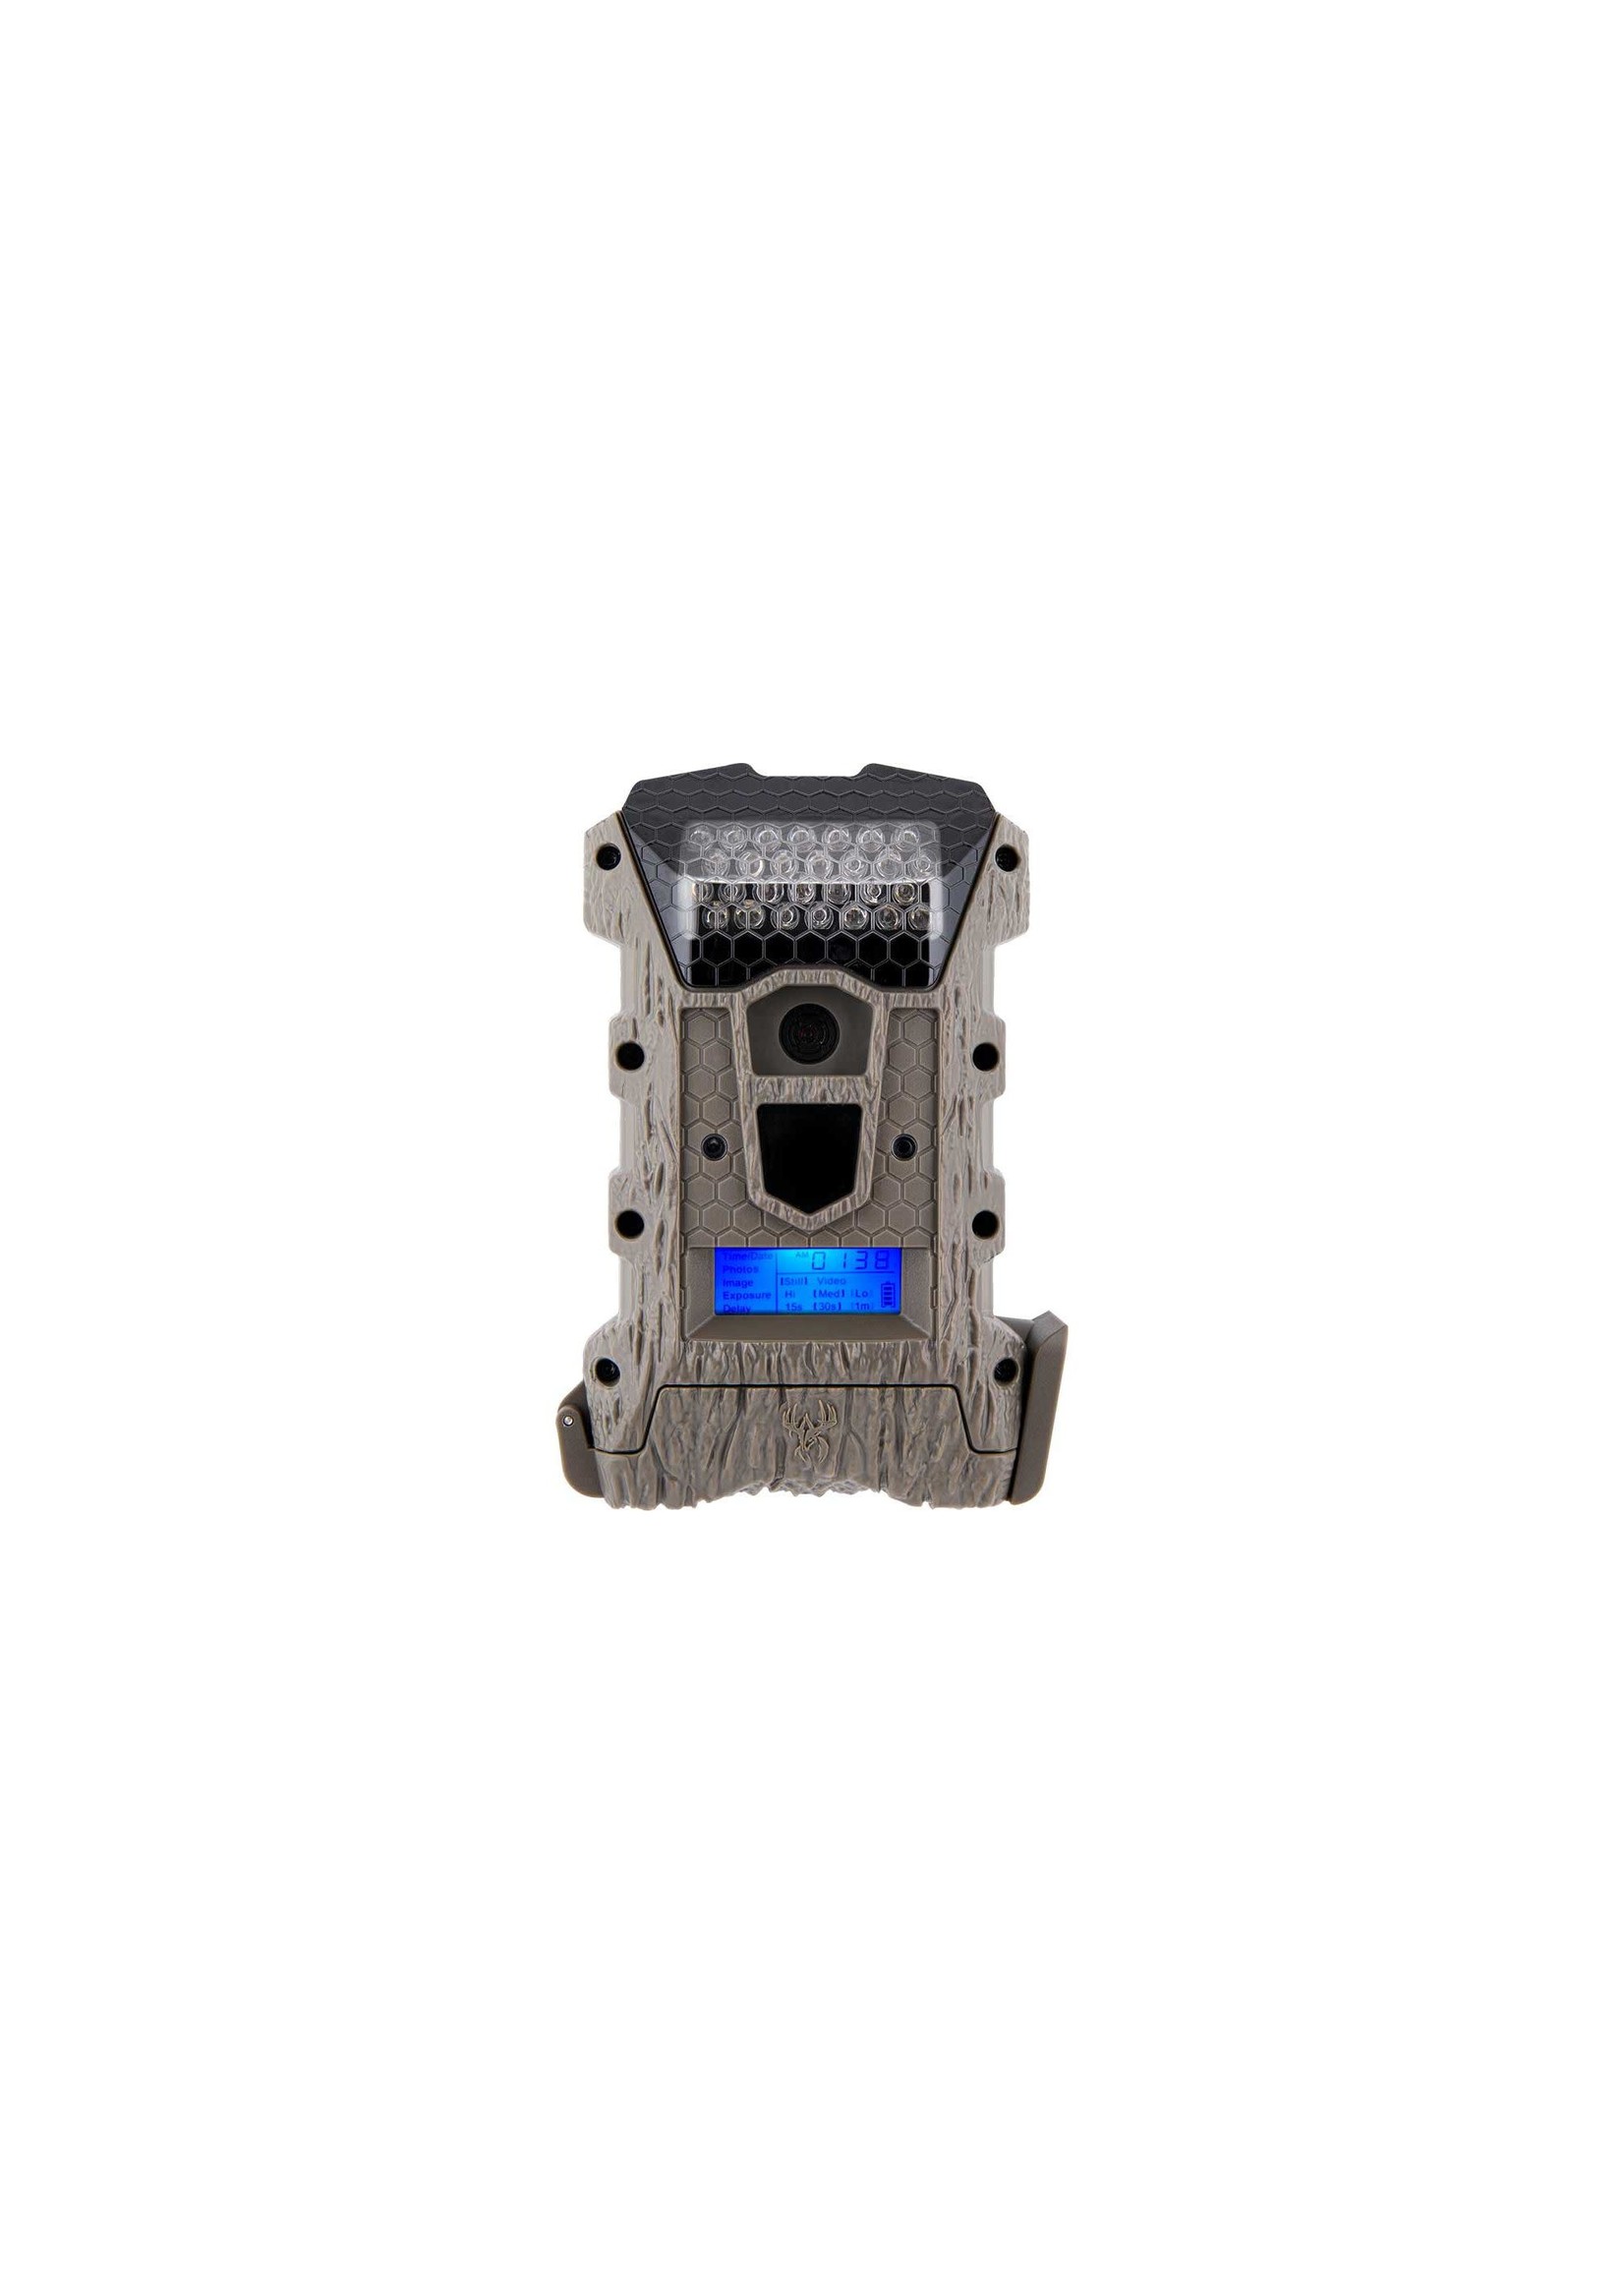 Wildgame Innovations Wraith 14mp Trail Cam